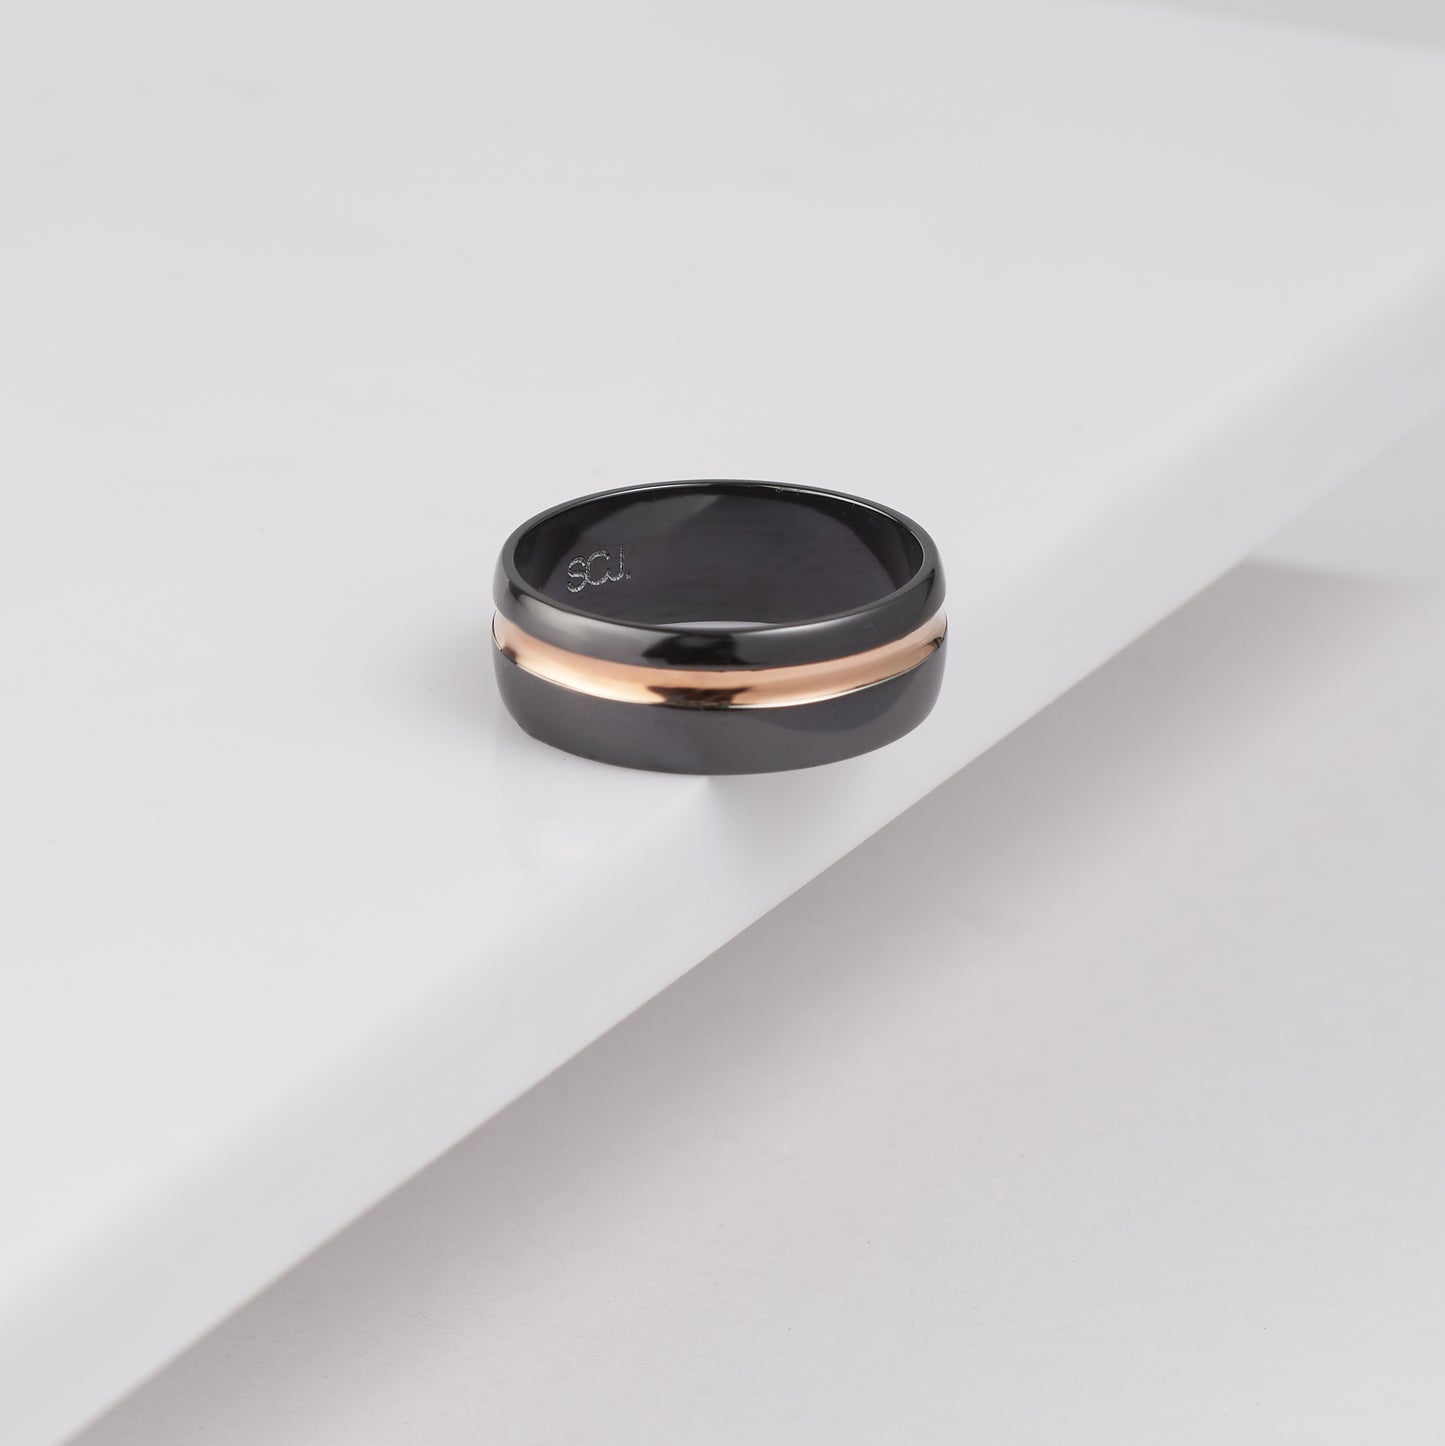 Black Zirconium Ring with an Offset Groove of Rose Gold